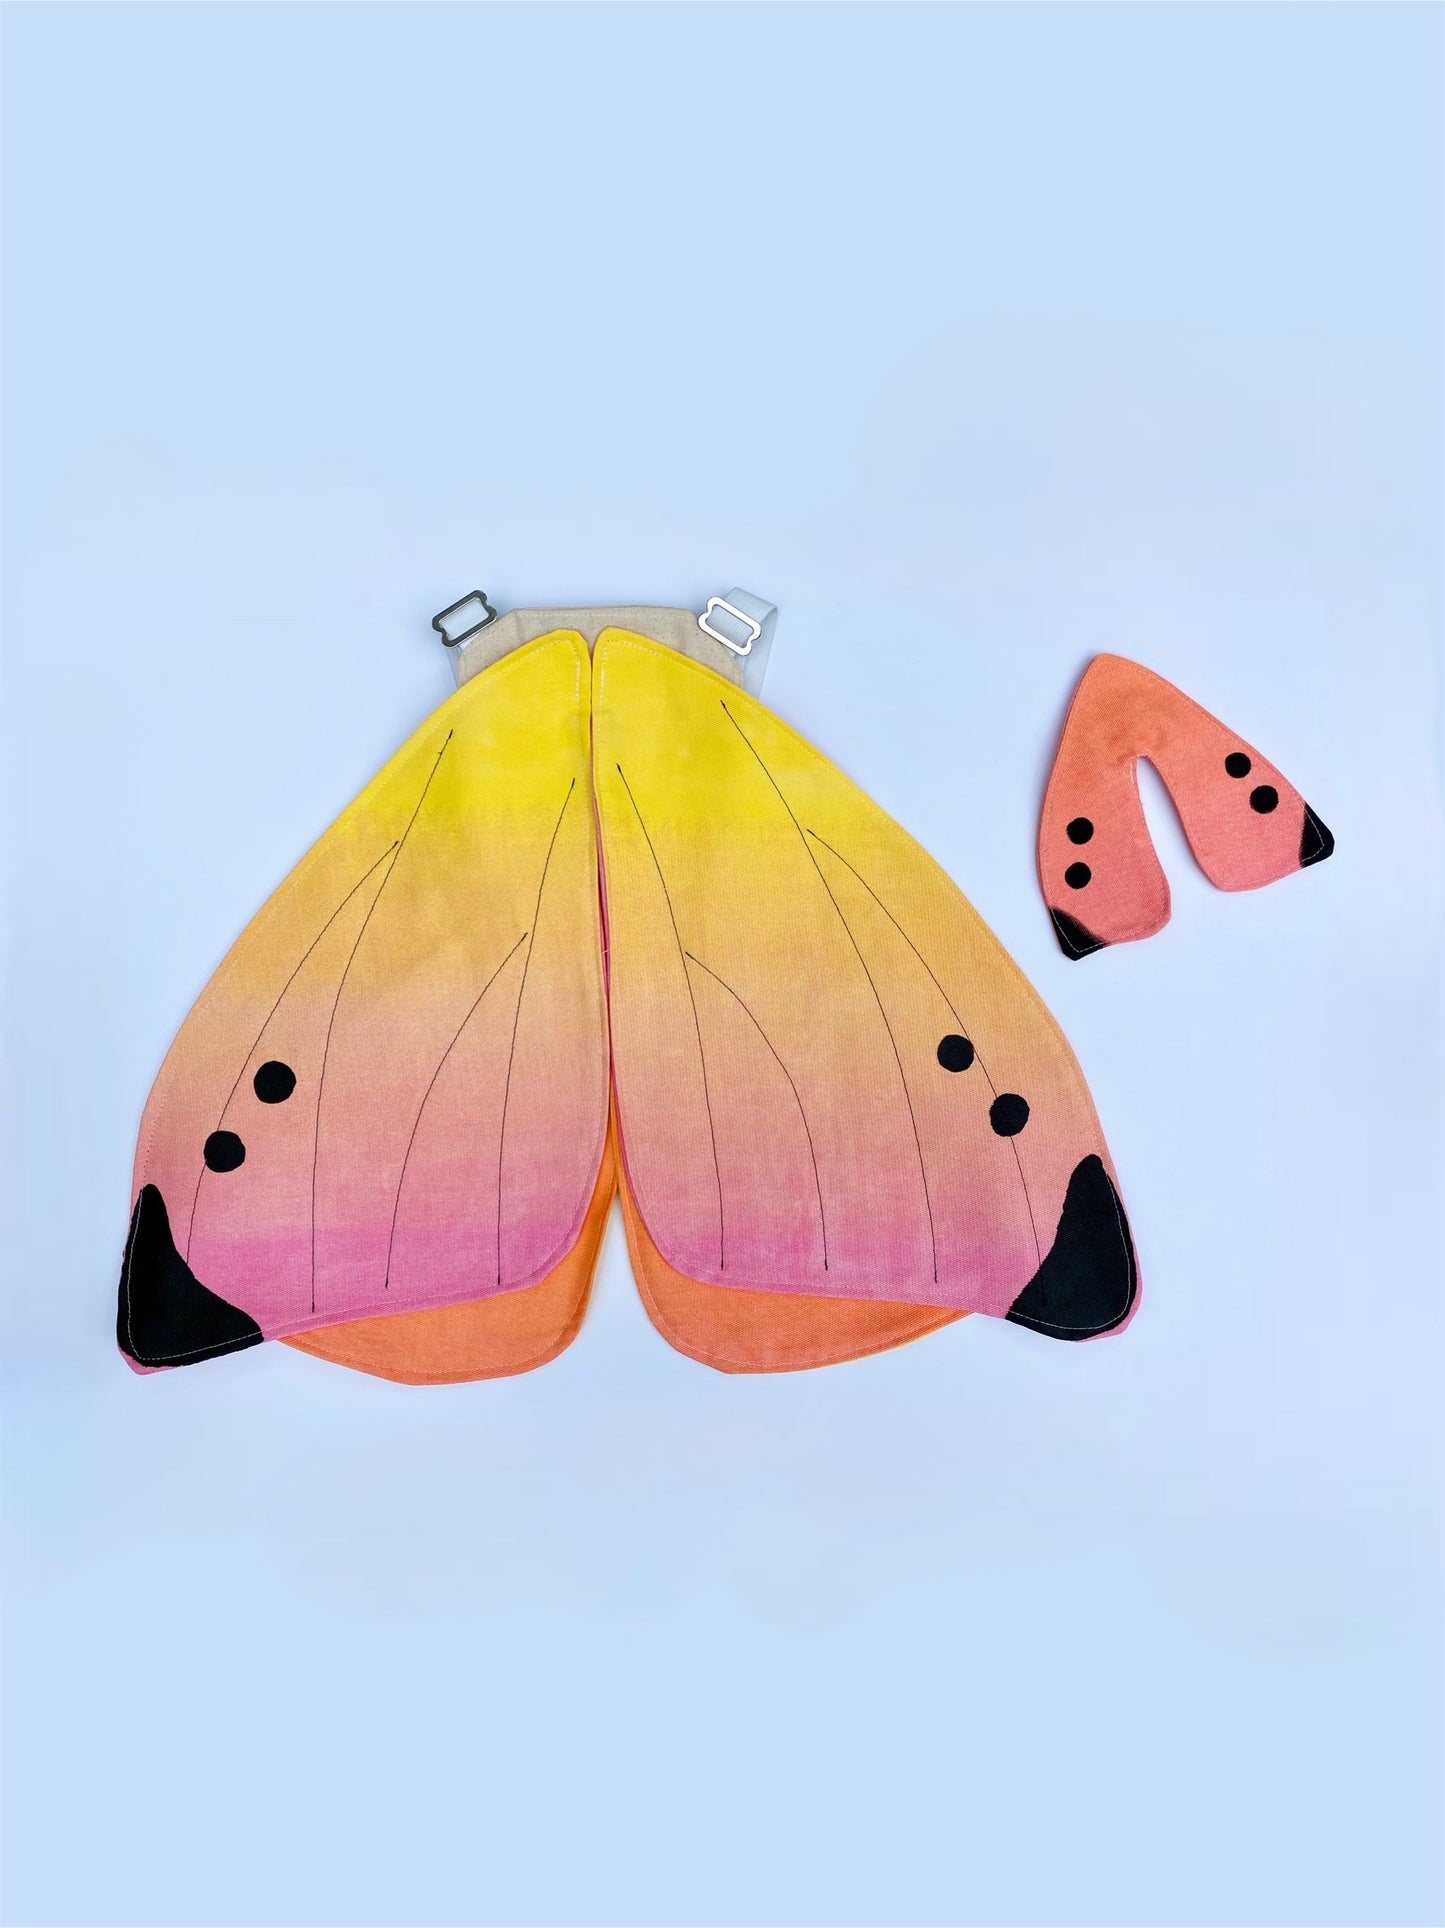 Doll butterfly wings that match child's butterfly fairy wings.